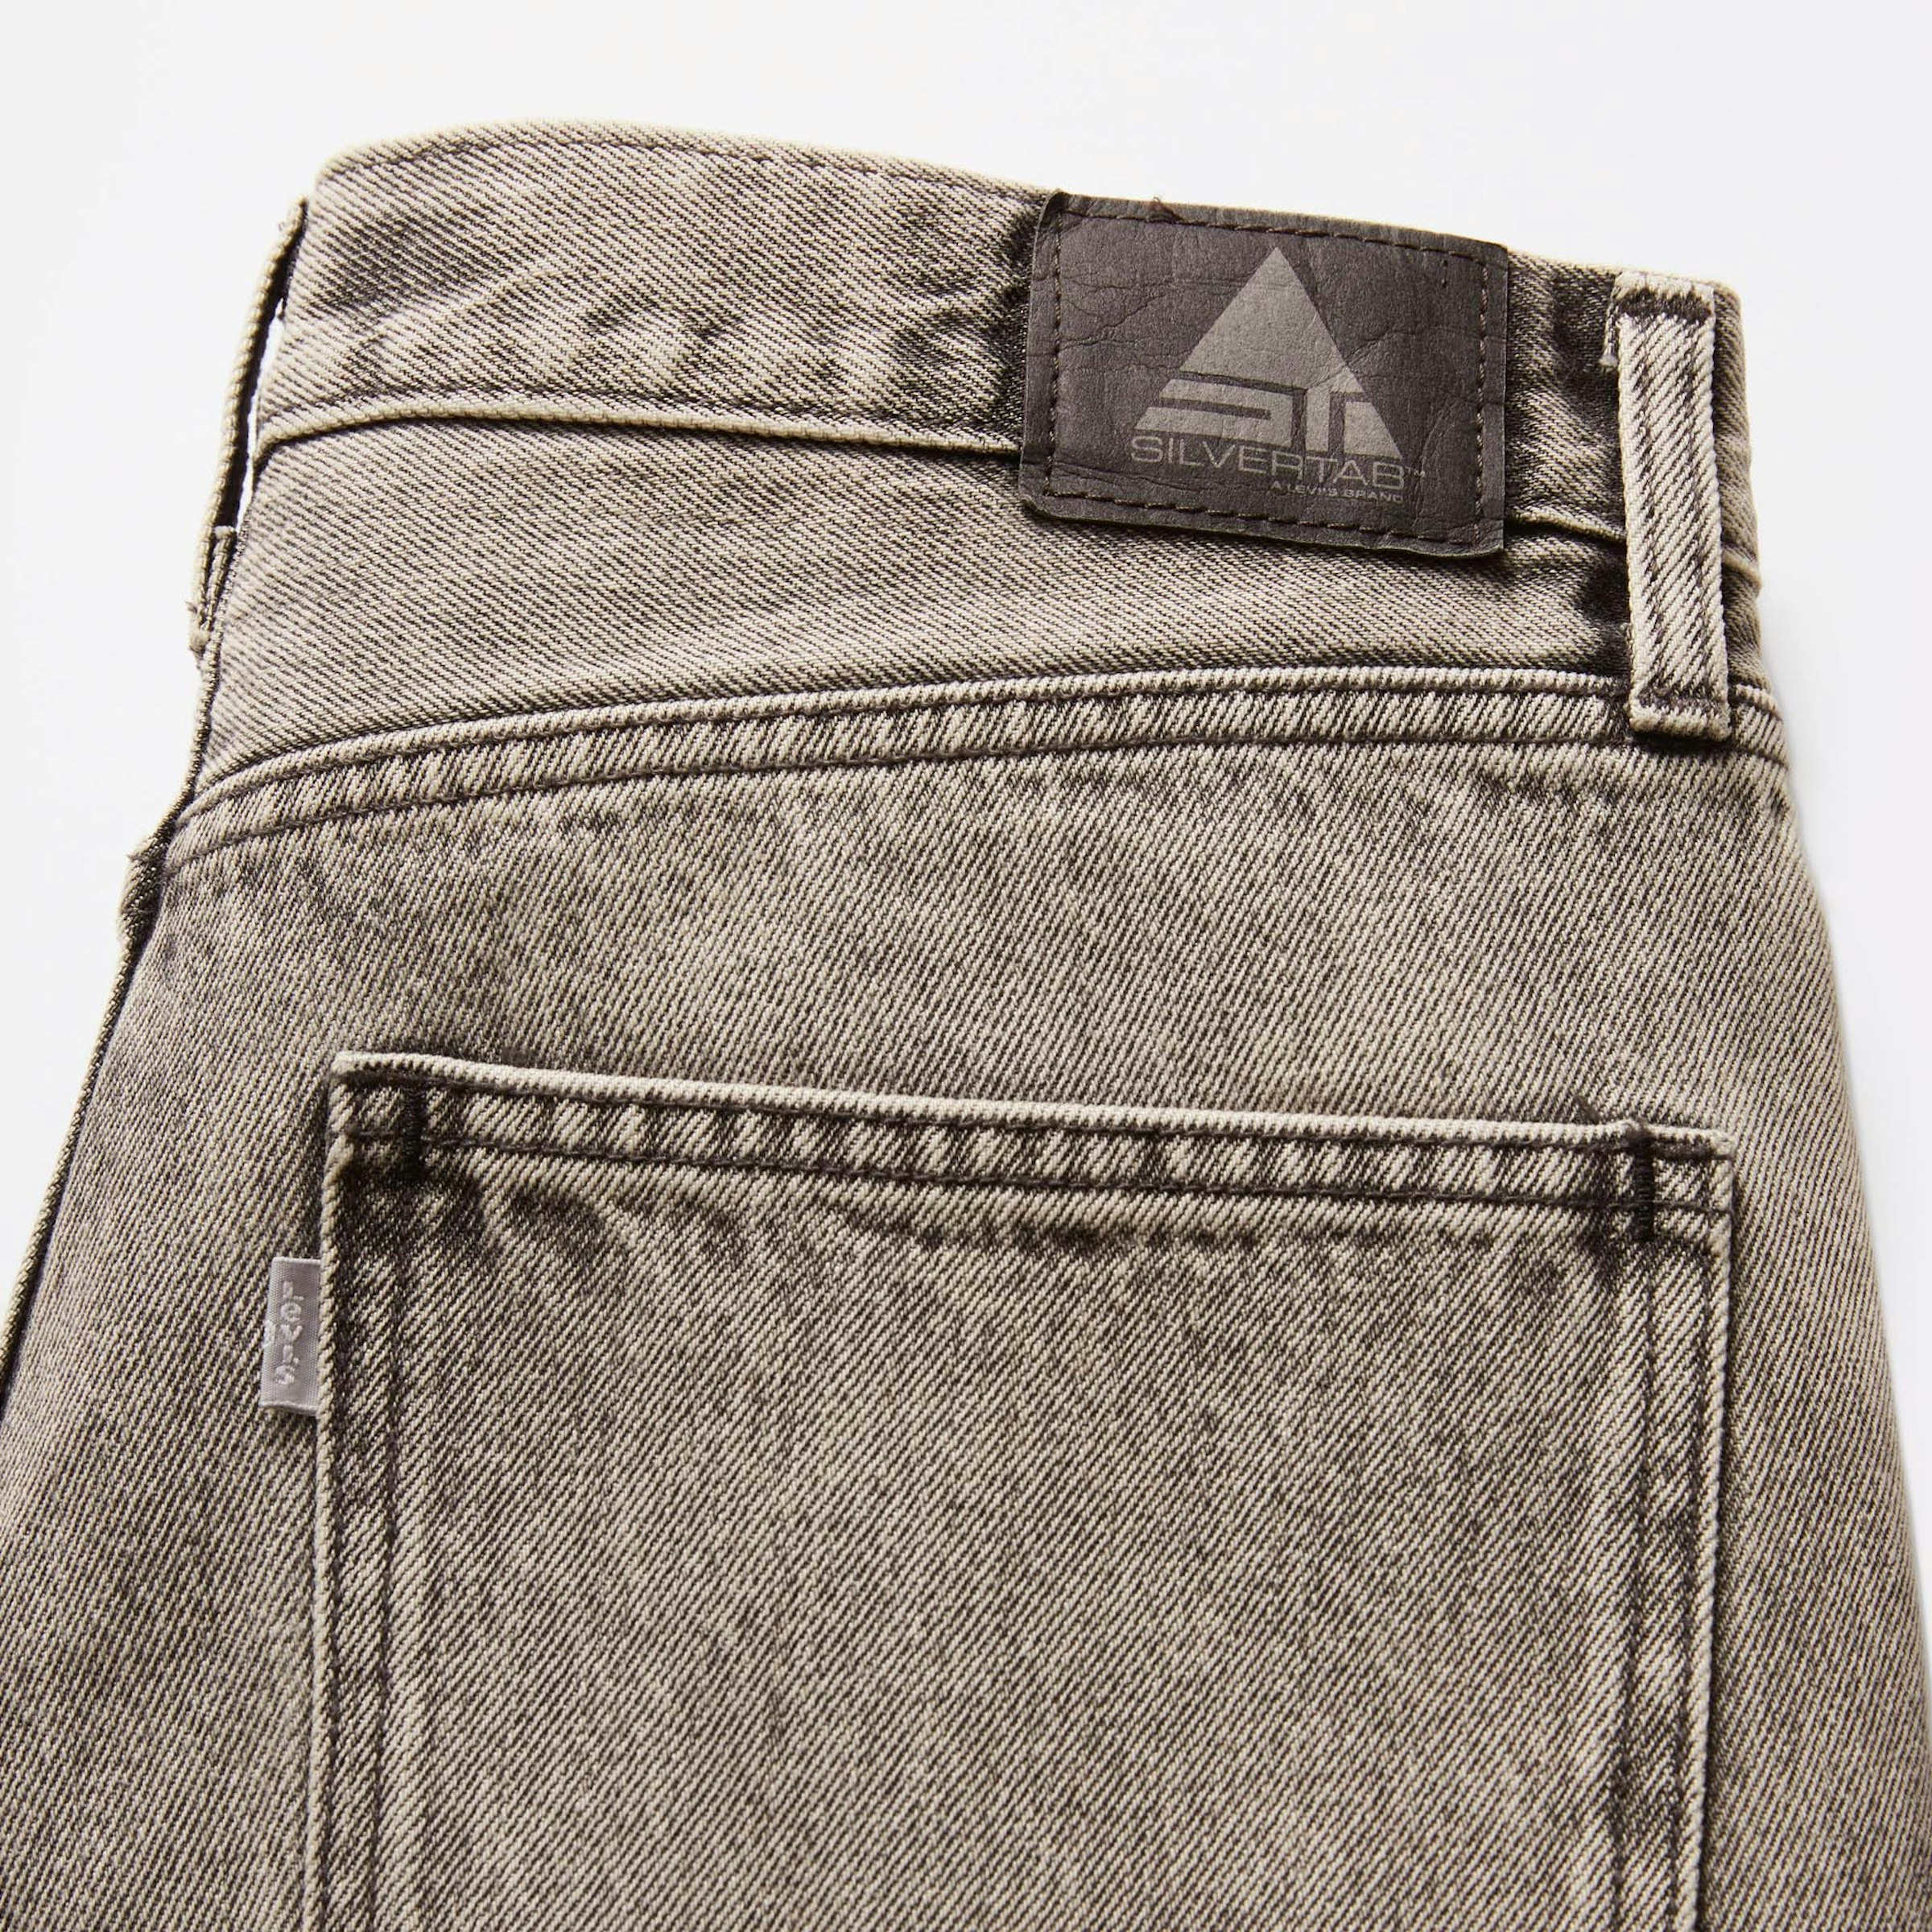 The hip pocket tab that turned into silver as a signature, and no Arcuate Stitching